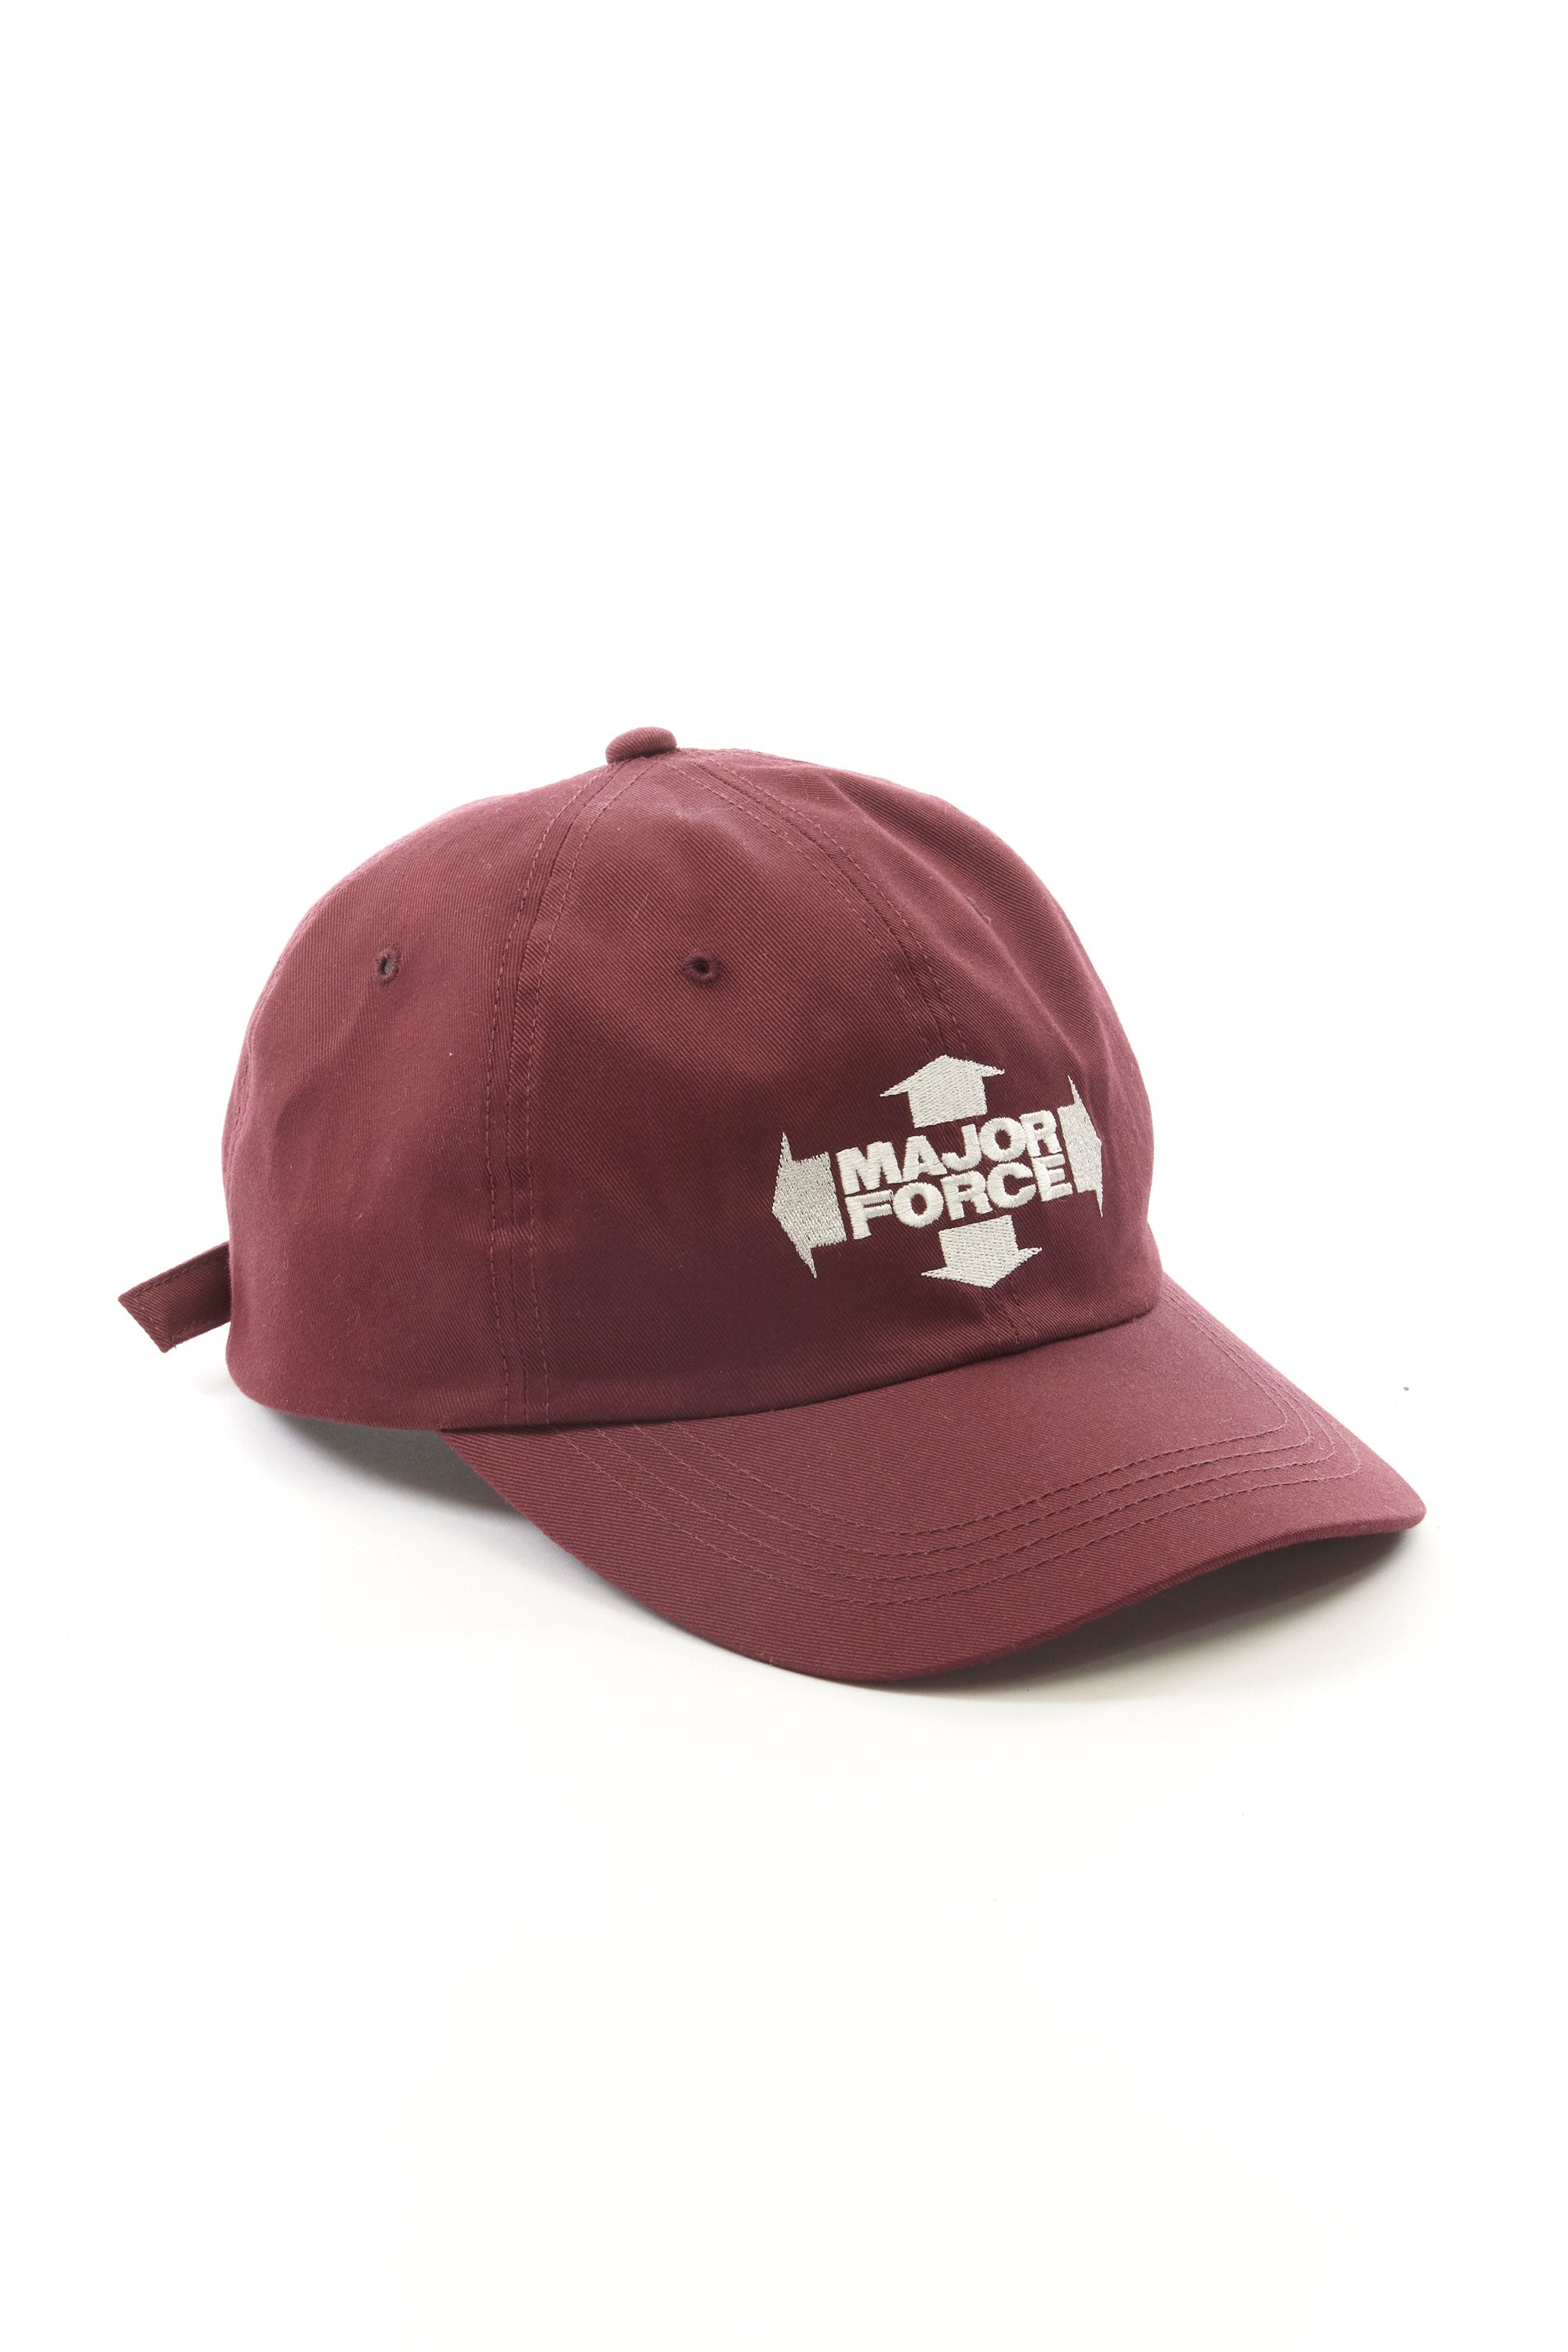 The NEIGHBORHOOD - NH x MAJOR FORCE DAD CAP  available online with global shipping, and in PAM Stores Melbourne and Sydney.